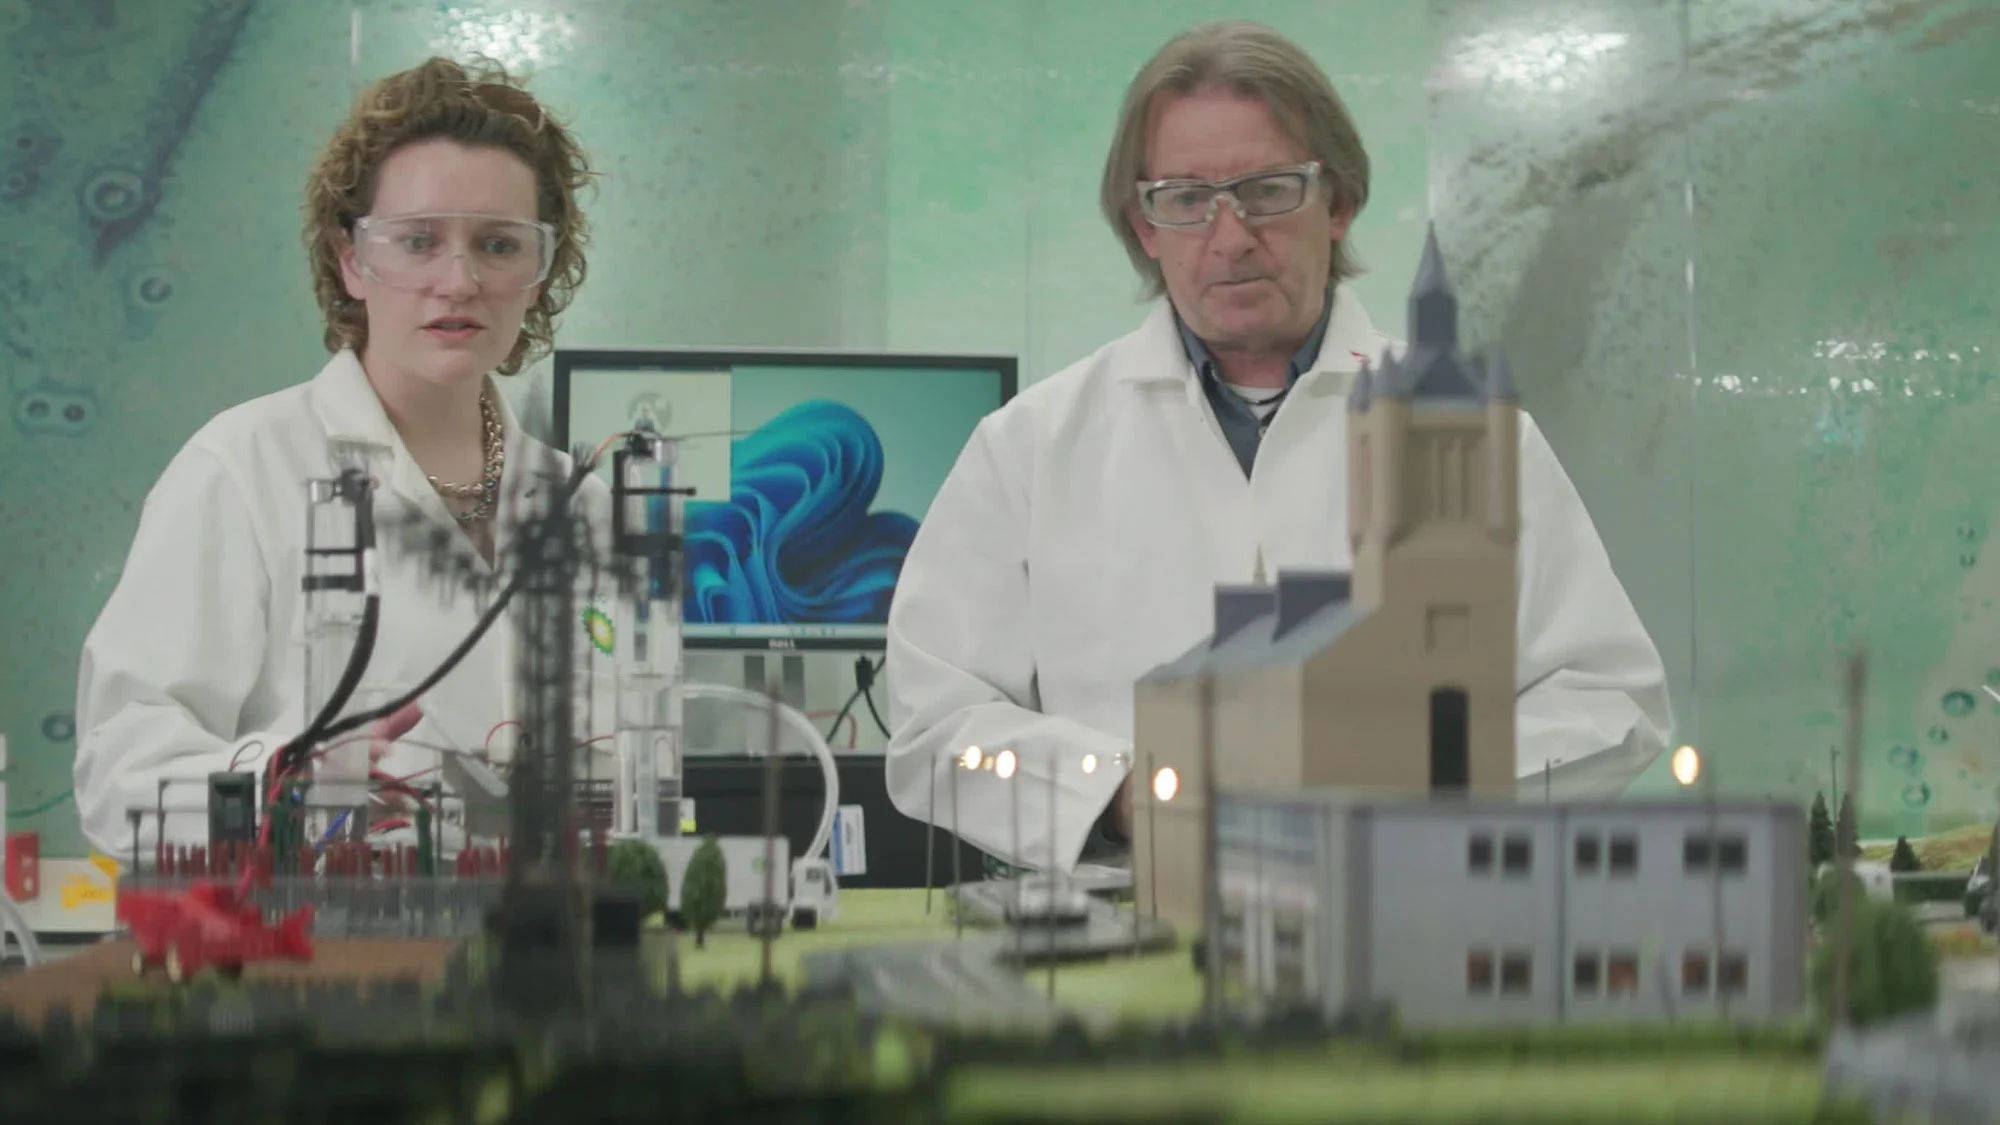 A real working scale model of Aberdeen has been built and a digital twin created to work as a development tool for the Aberdeen Hydrogen Hub project